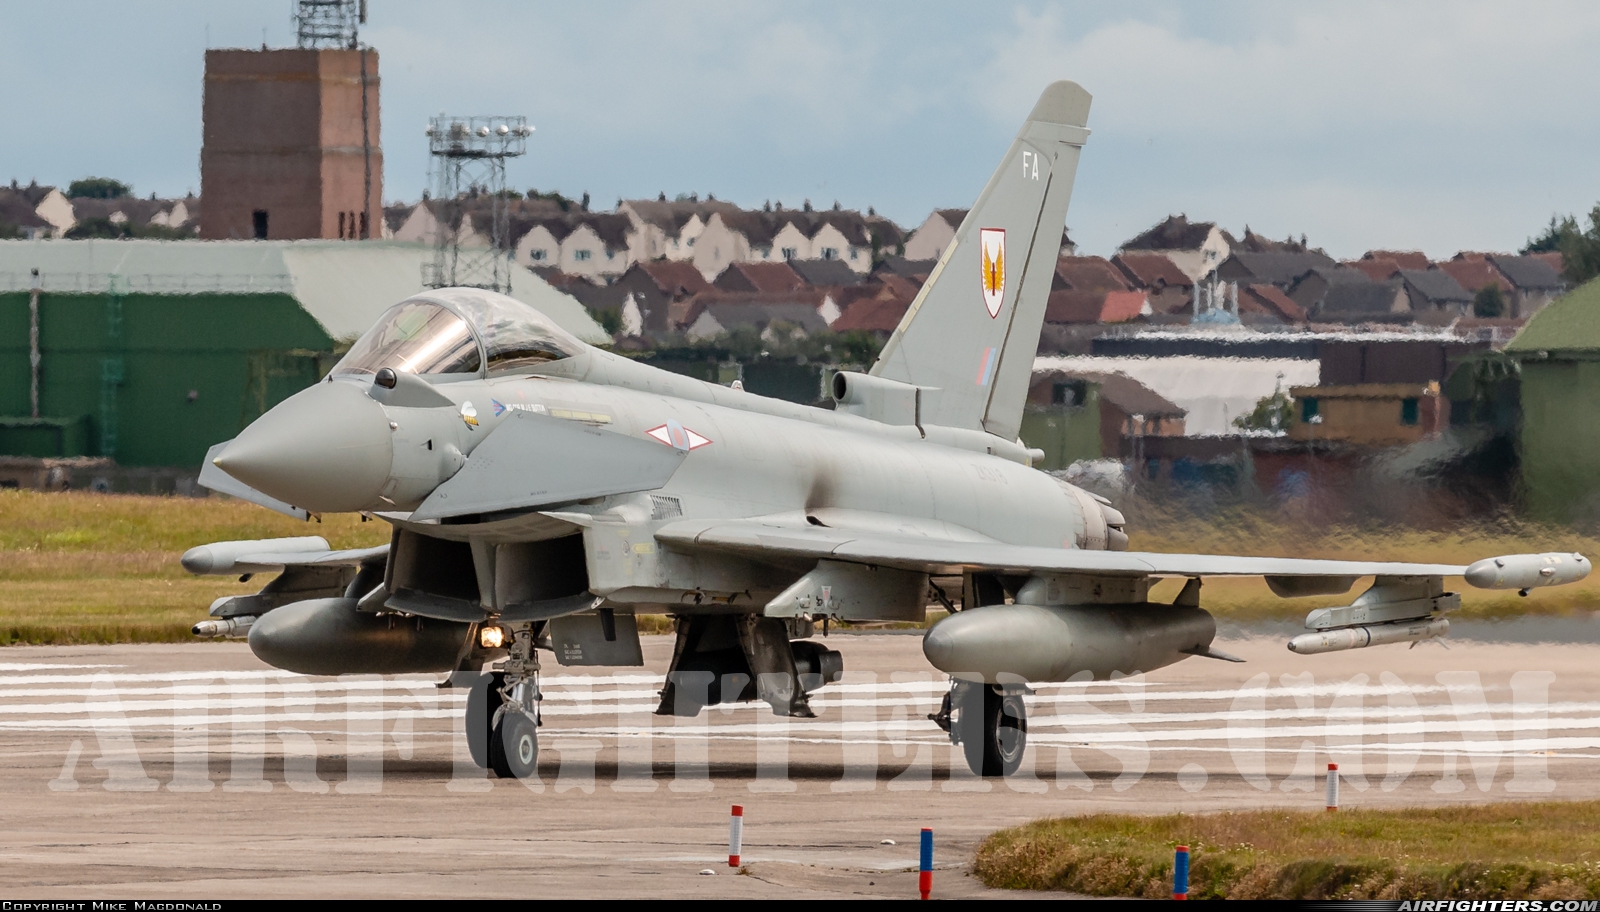 UK - Air Force Eurofighter Typhoon FGR4 ZK316 at Lossiemouth (LMO / EGQS), UK